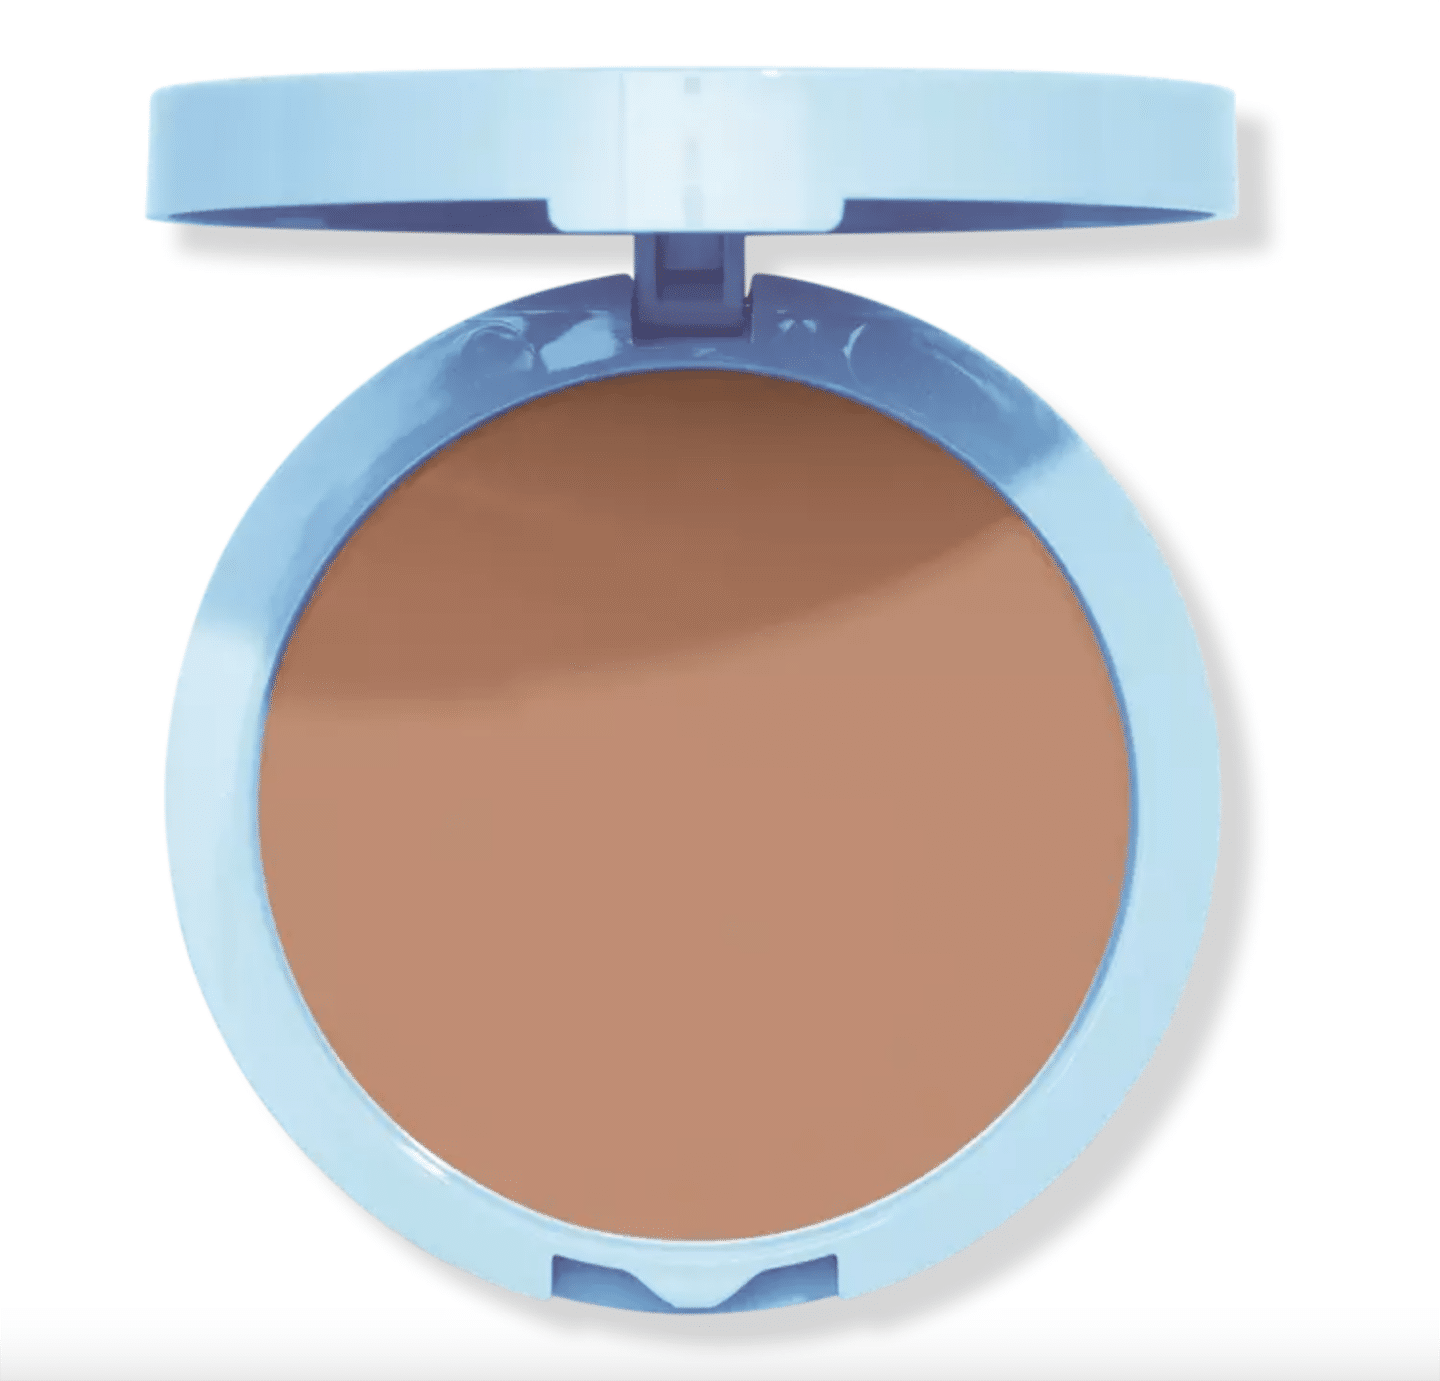 9 best drugstore foundation powders, by beauty blogger What The Fab